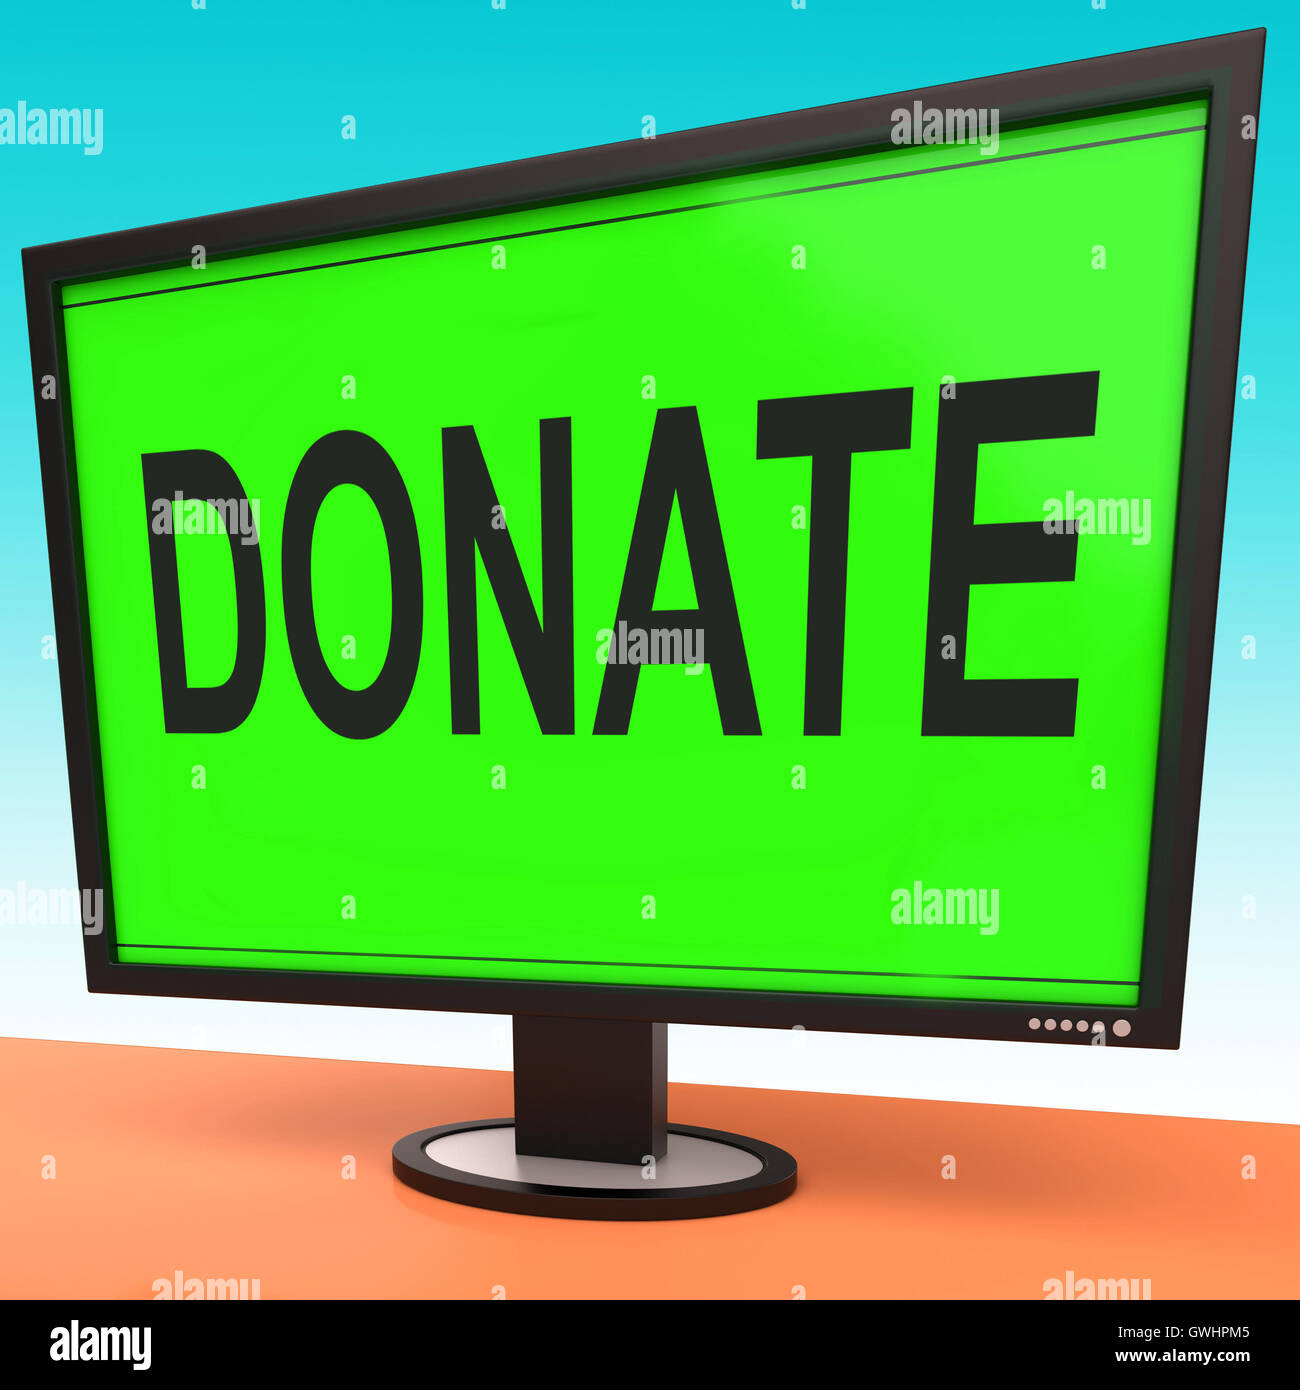 Donate Computer Shows Charity Donating And Fundraising Stock Photo